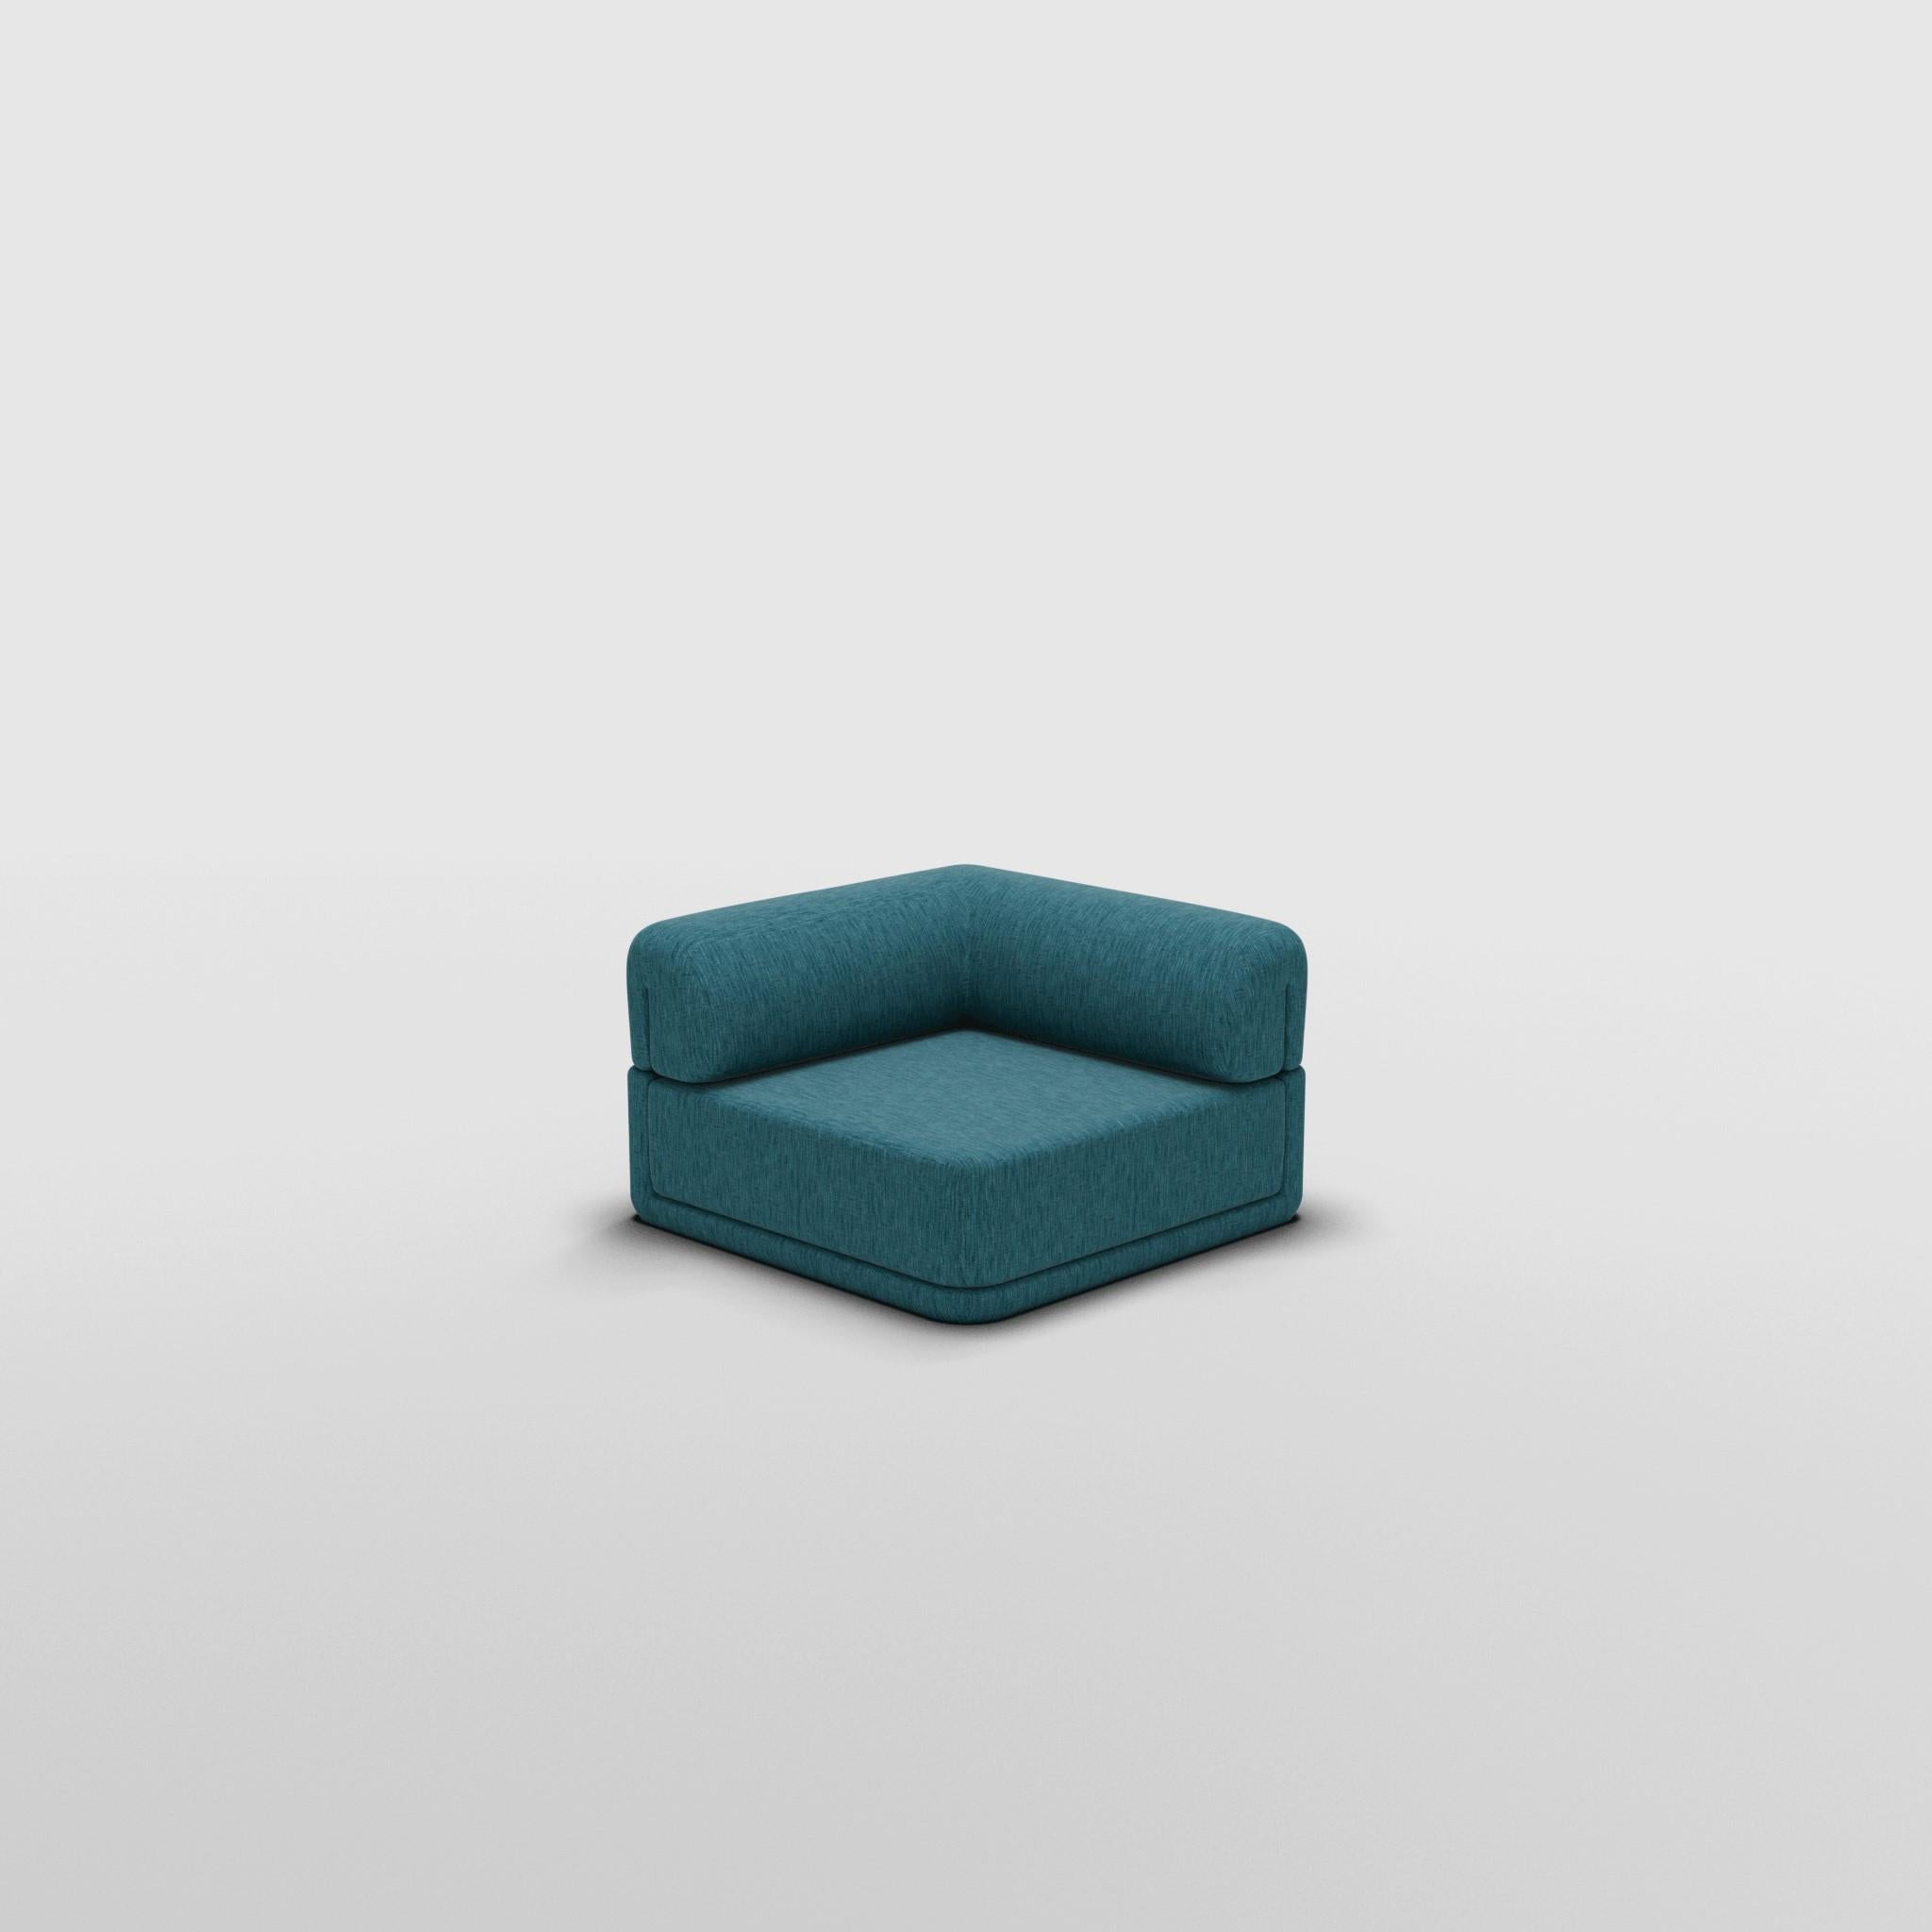 Cube Corner Seat - Inspired by 70s Italian Luxury Furniture

Discover The Cube Sofa, where art meets adaptability. Its sculptural design and customizable comfort create endless possibilities for your living space. Make a statement, elevate your